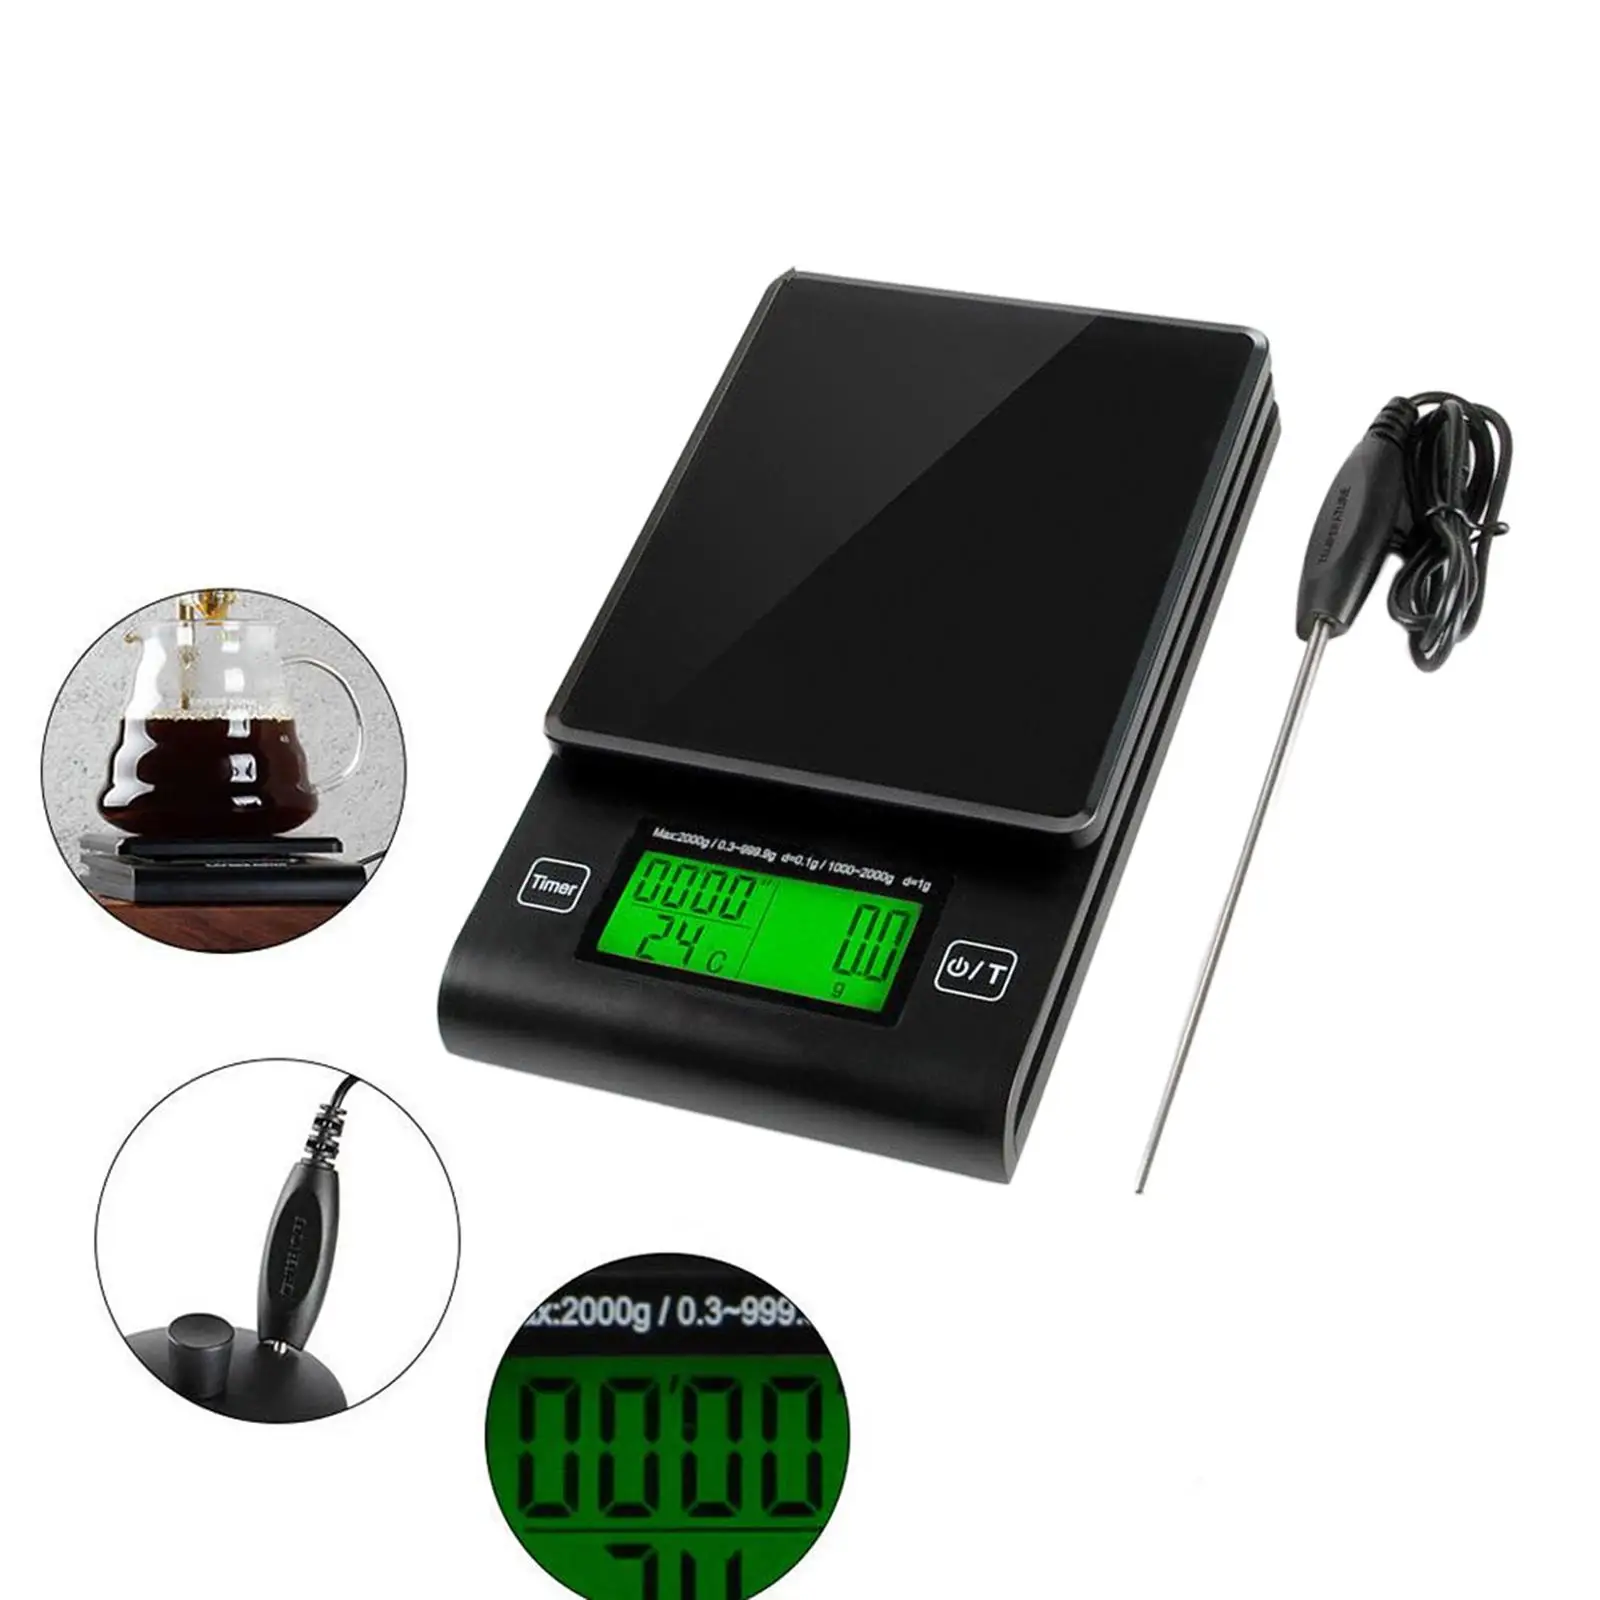 Multifunction Digital Kitchen Scale LED Display 0.5G/2kg Food Scale Electronic Espresso Scale for Restaurant Kitchen Home Cafe